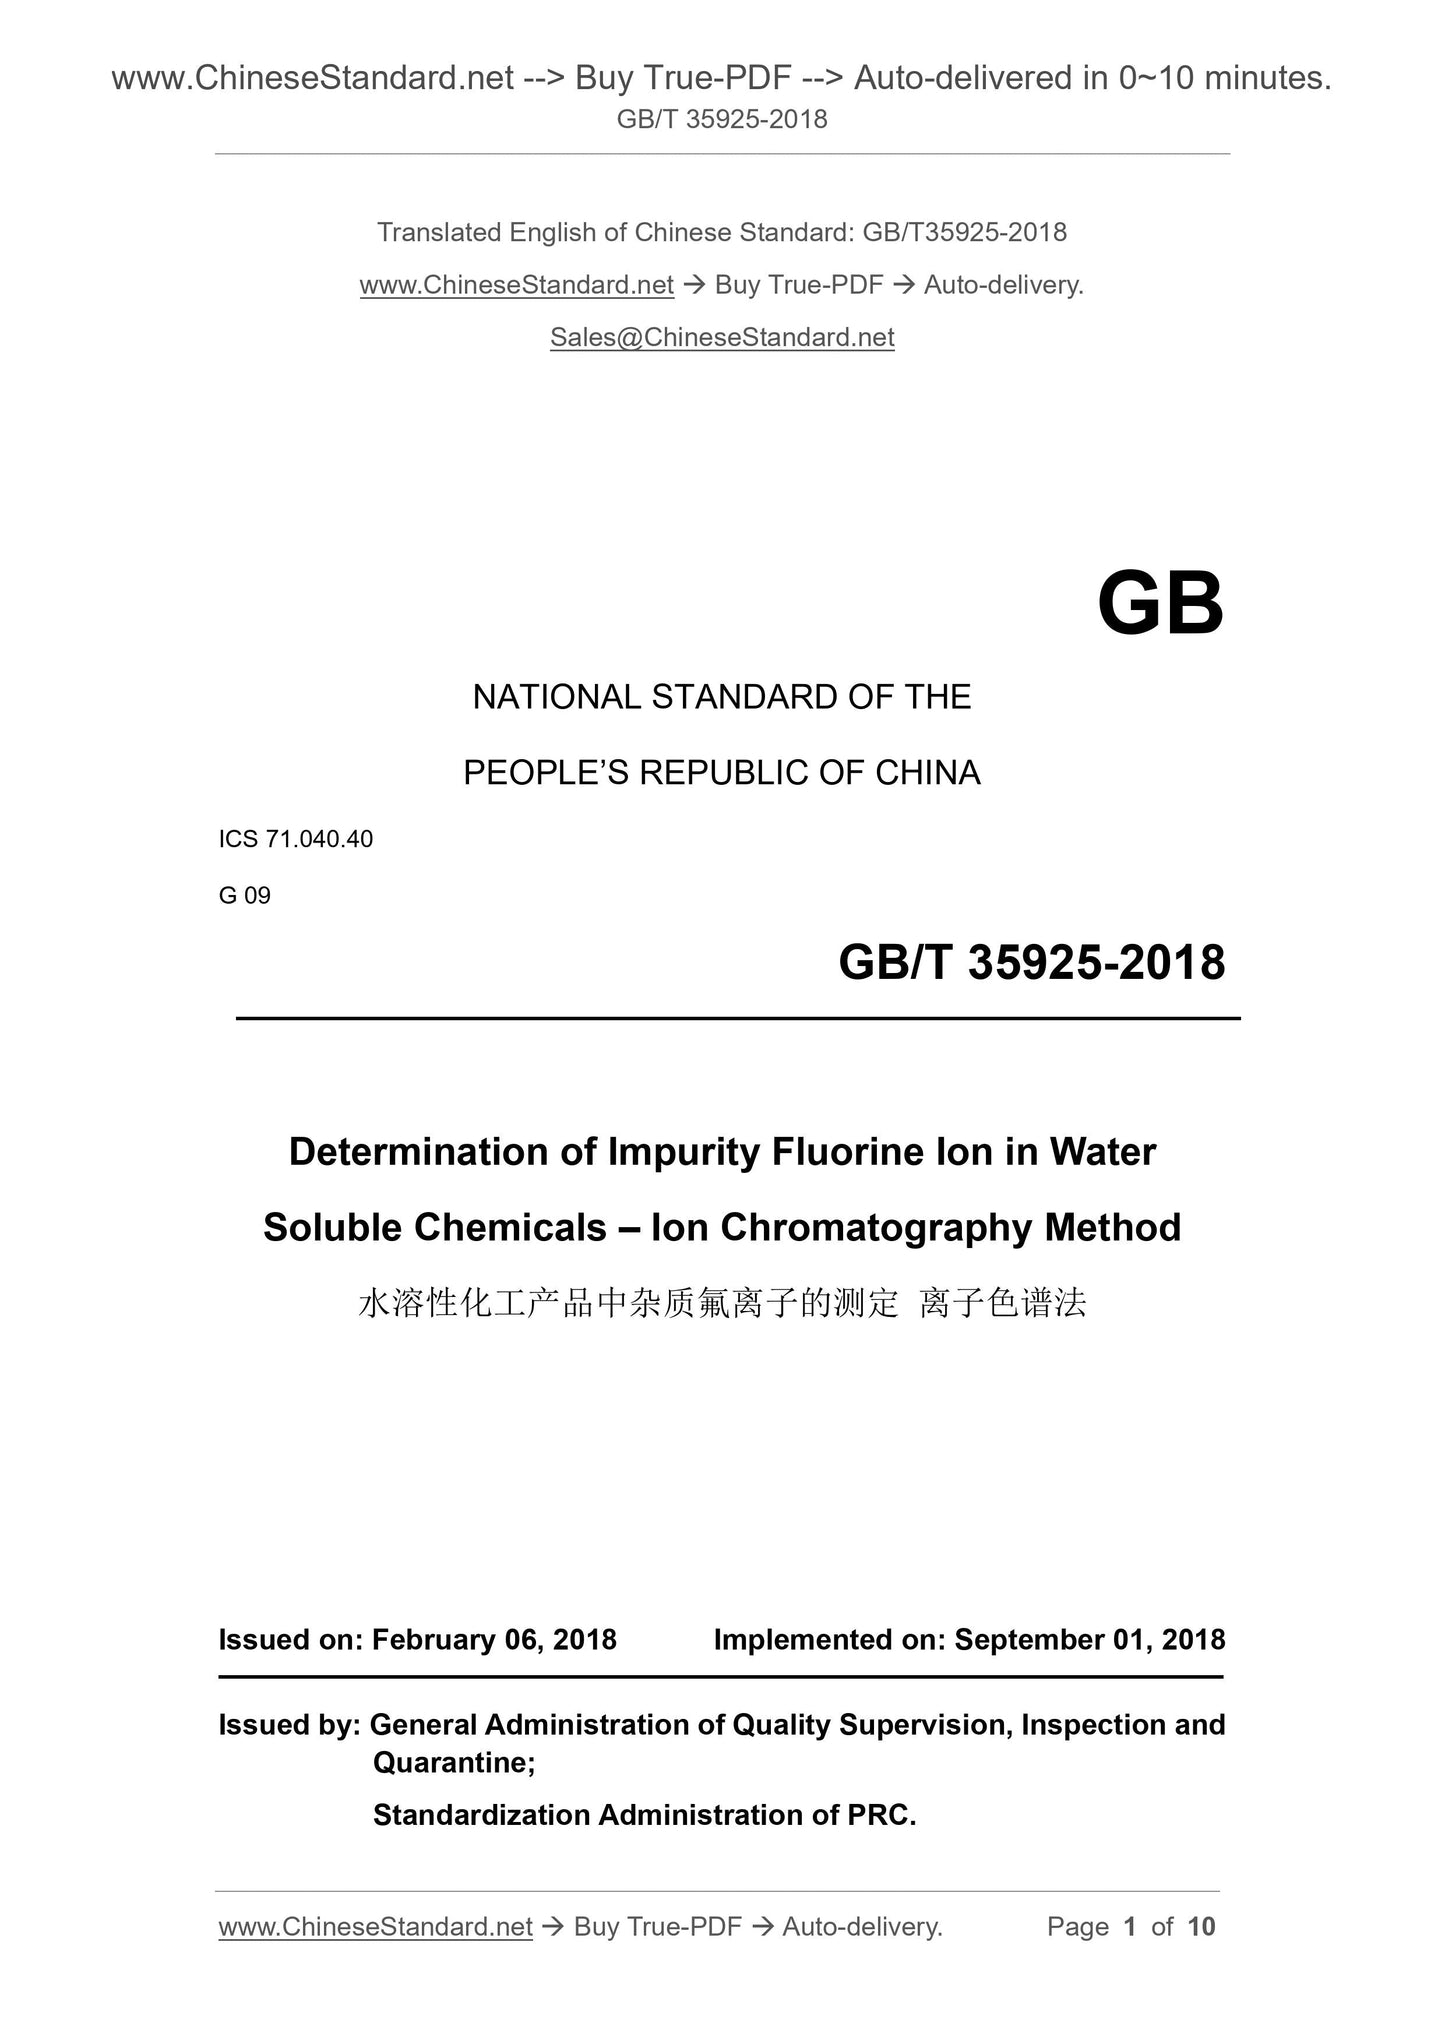 GB/T 35925-2018 Page 1